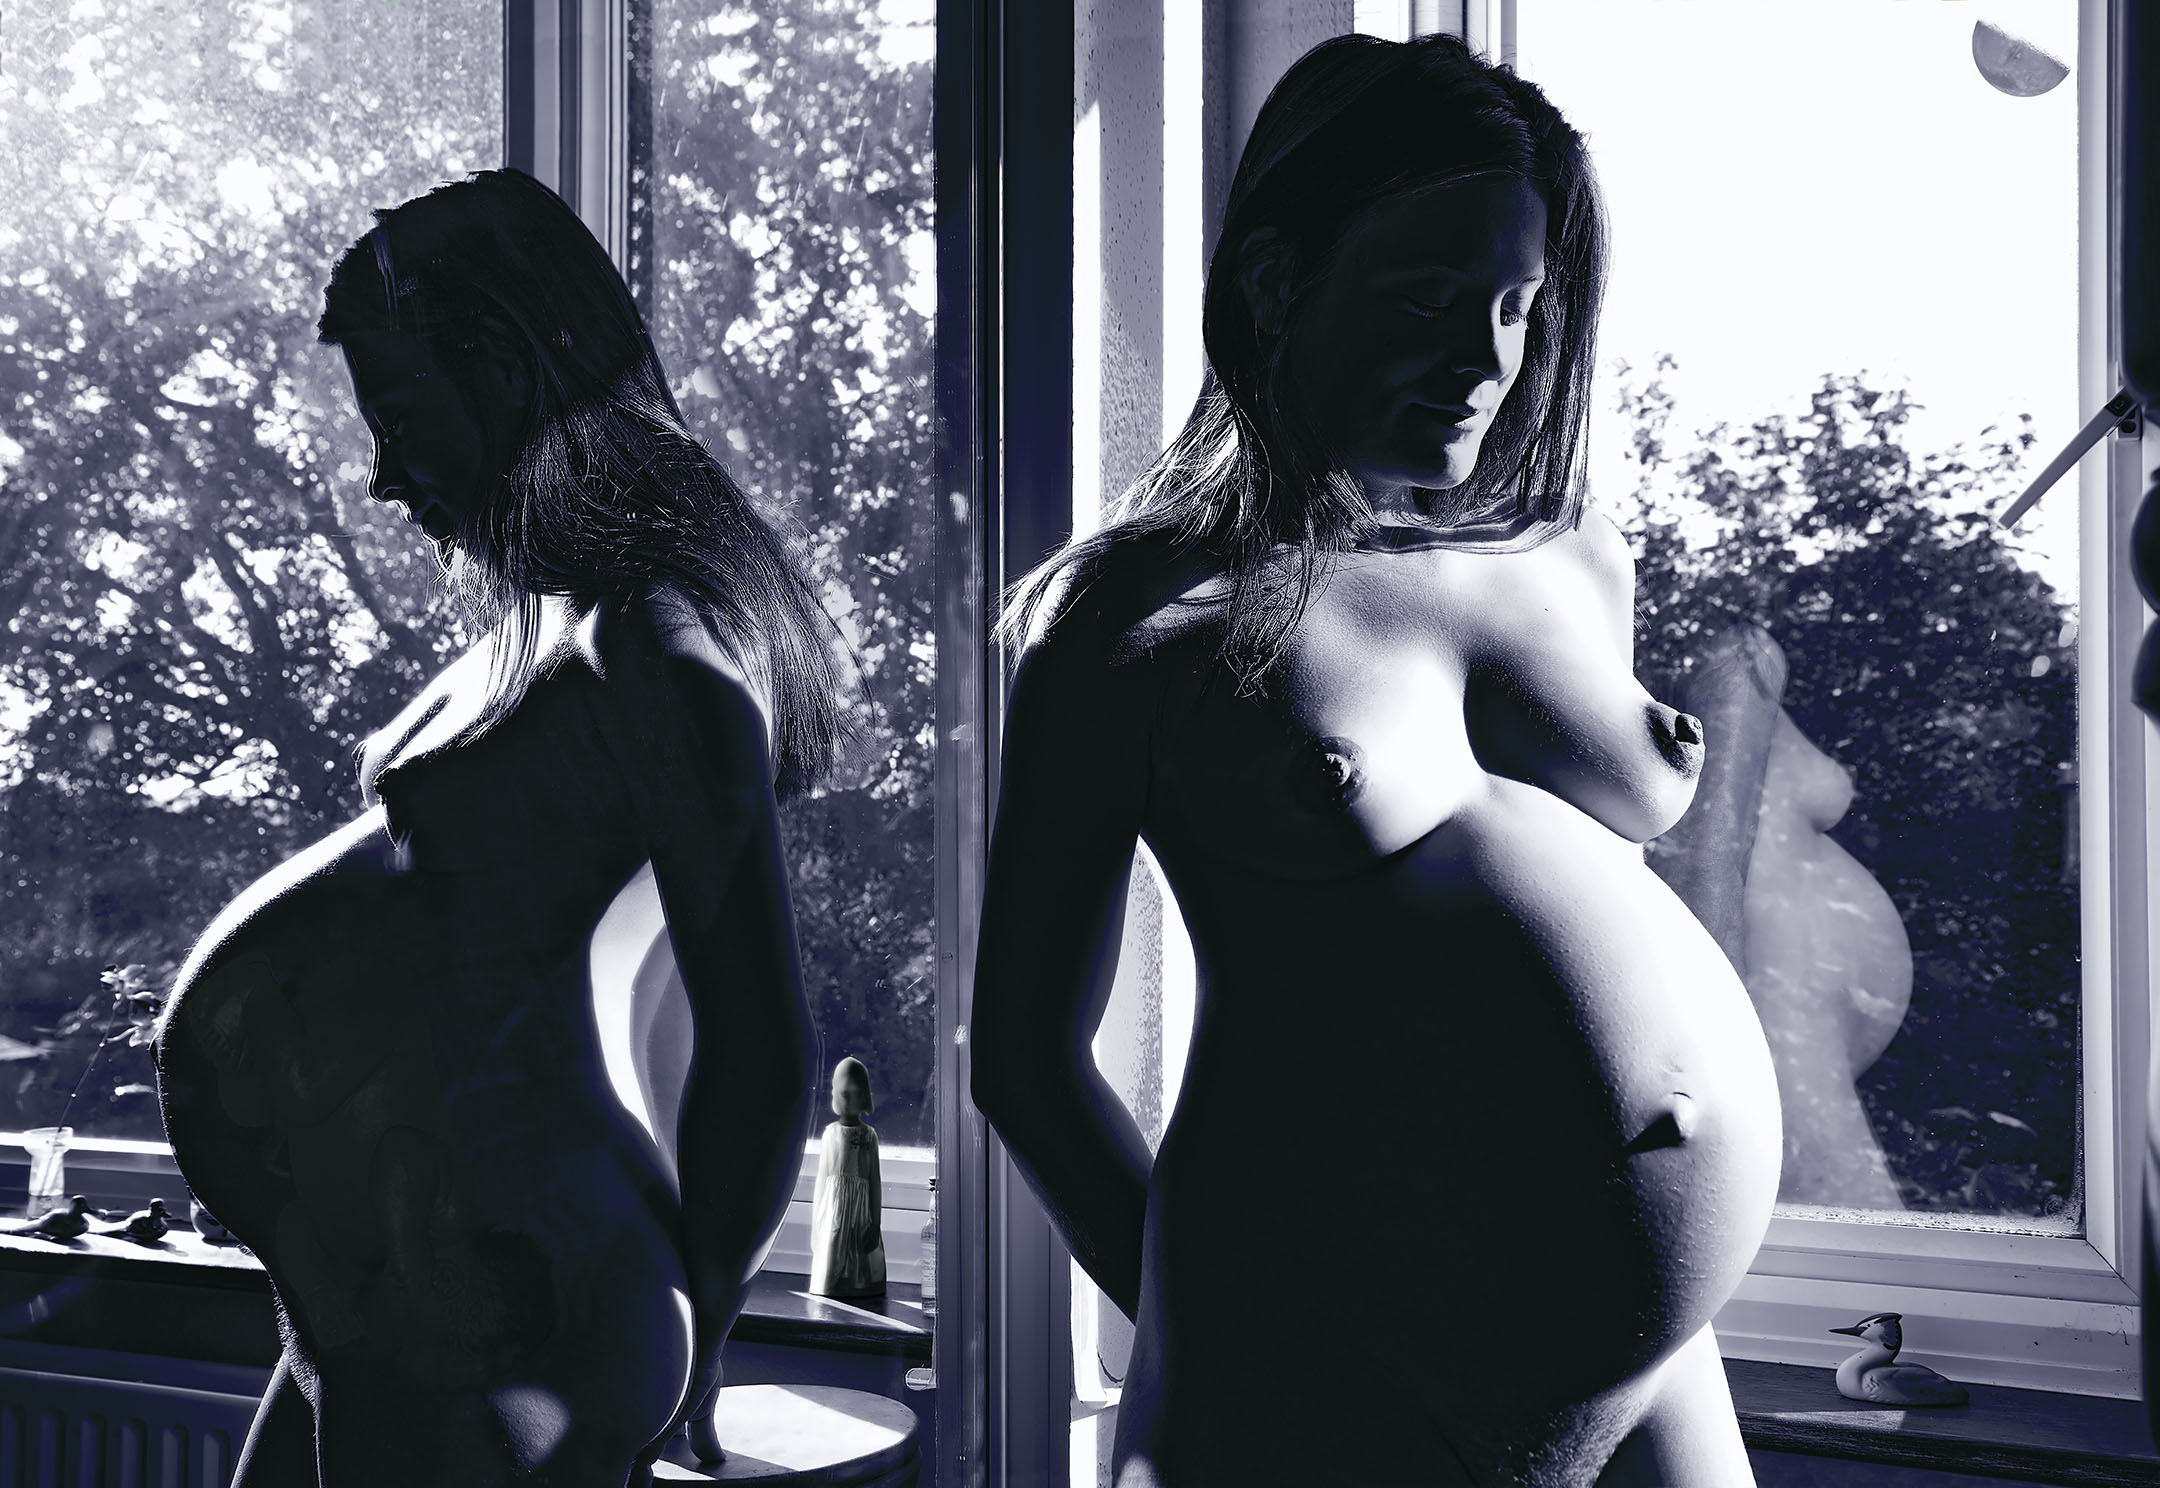 Pregnant Reflections, 2006, 36” x 52”